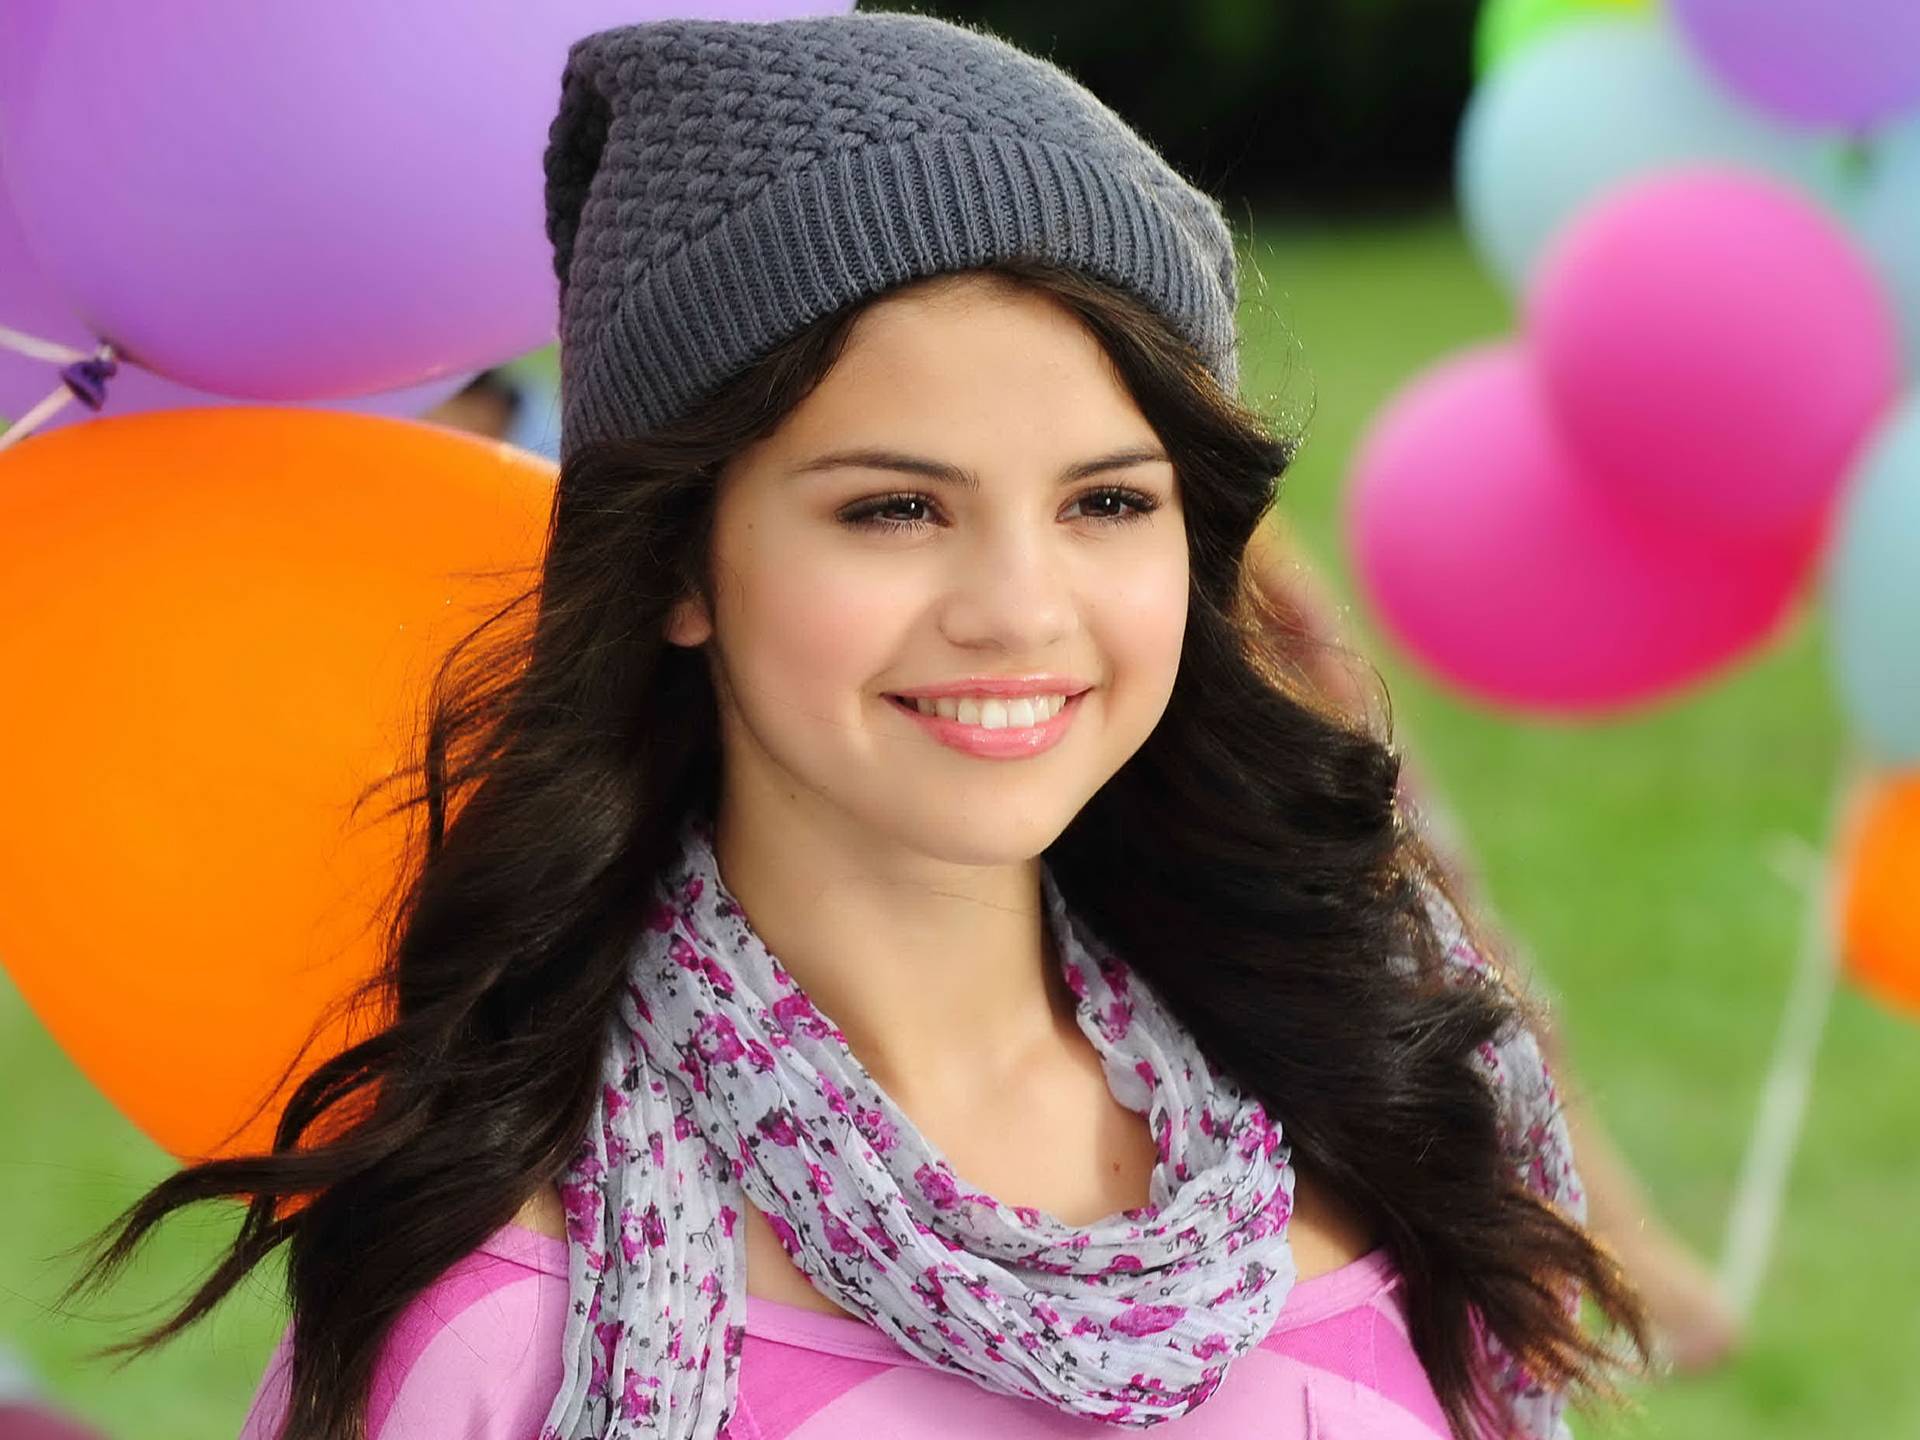 Selena Gomez Awesomest Wallpaper Image 6 HD Wallpaper. Hdimges